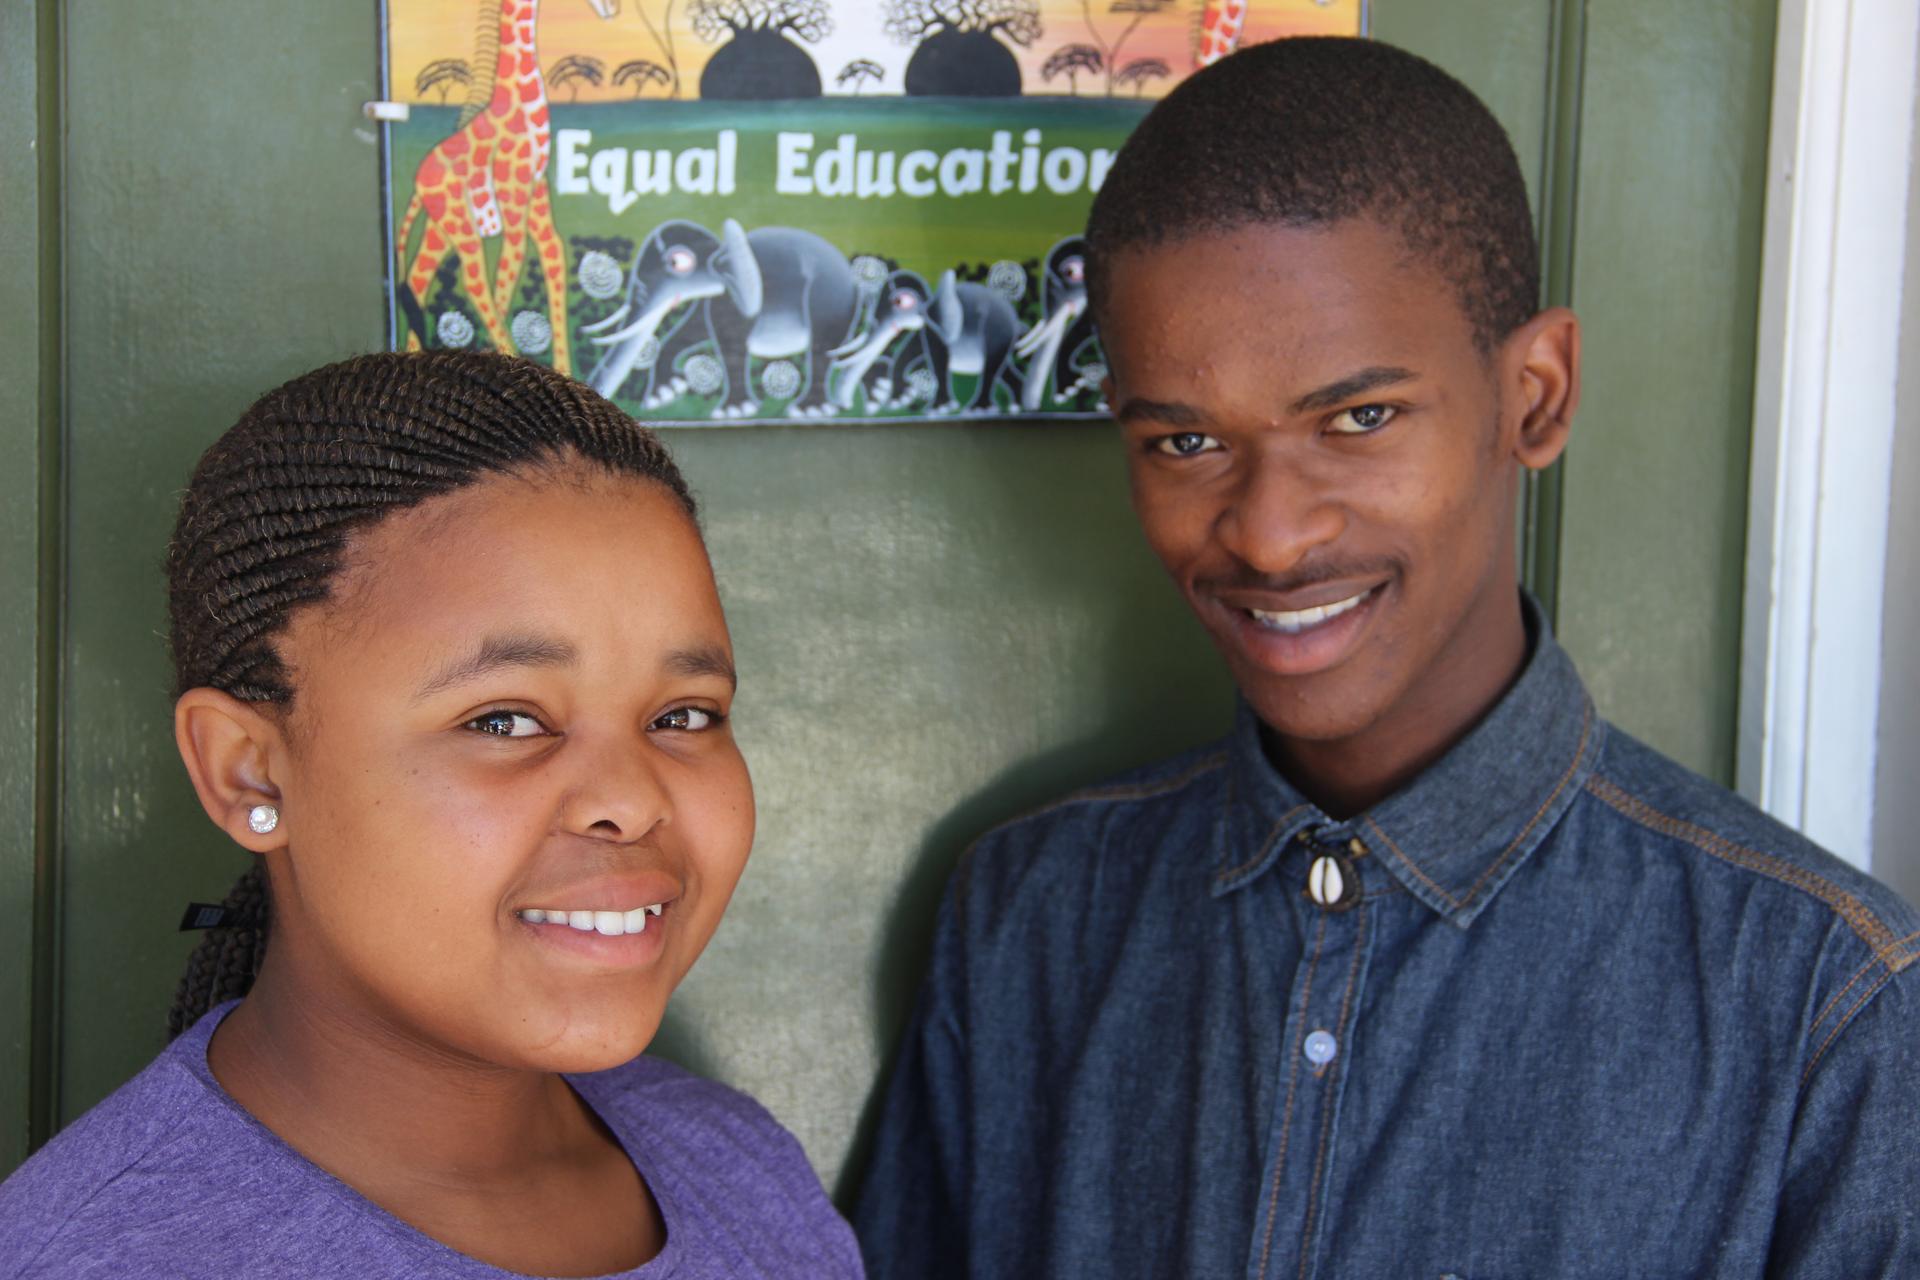 Somila and Bayanda are students at COSAT, a Cape Town high school